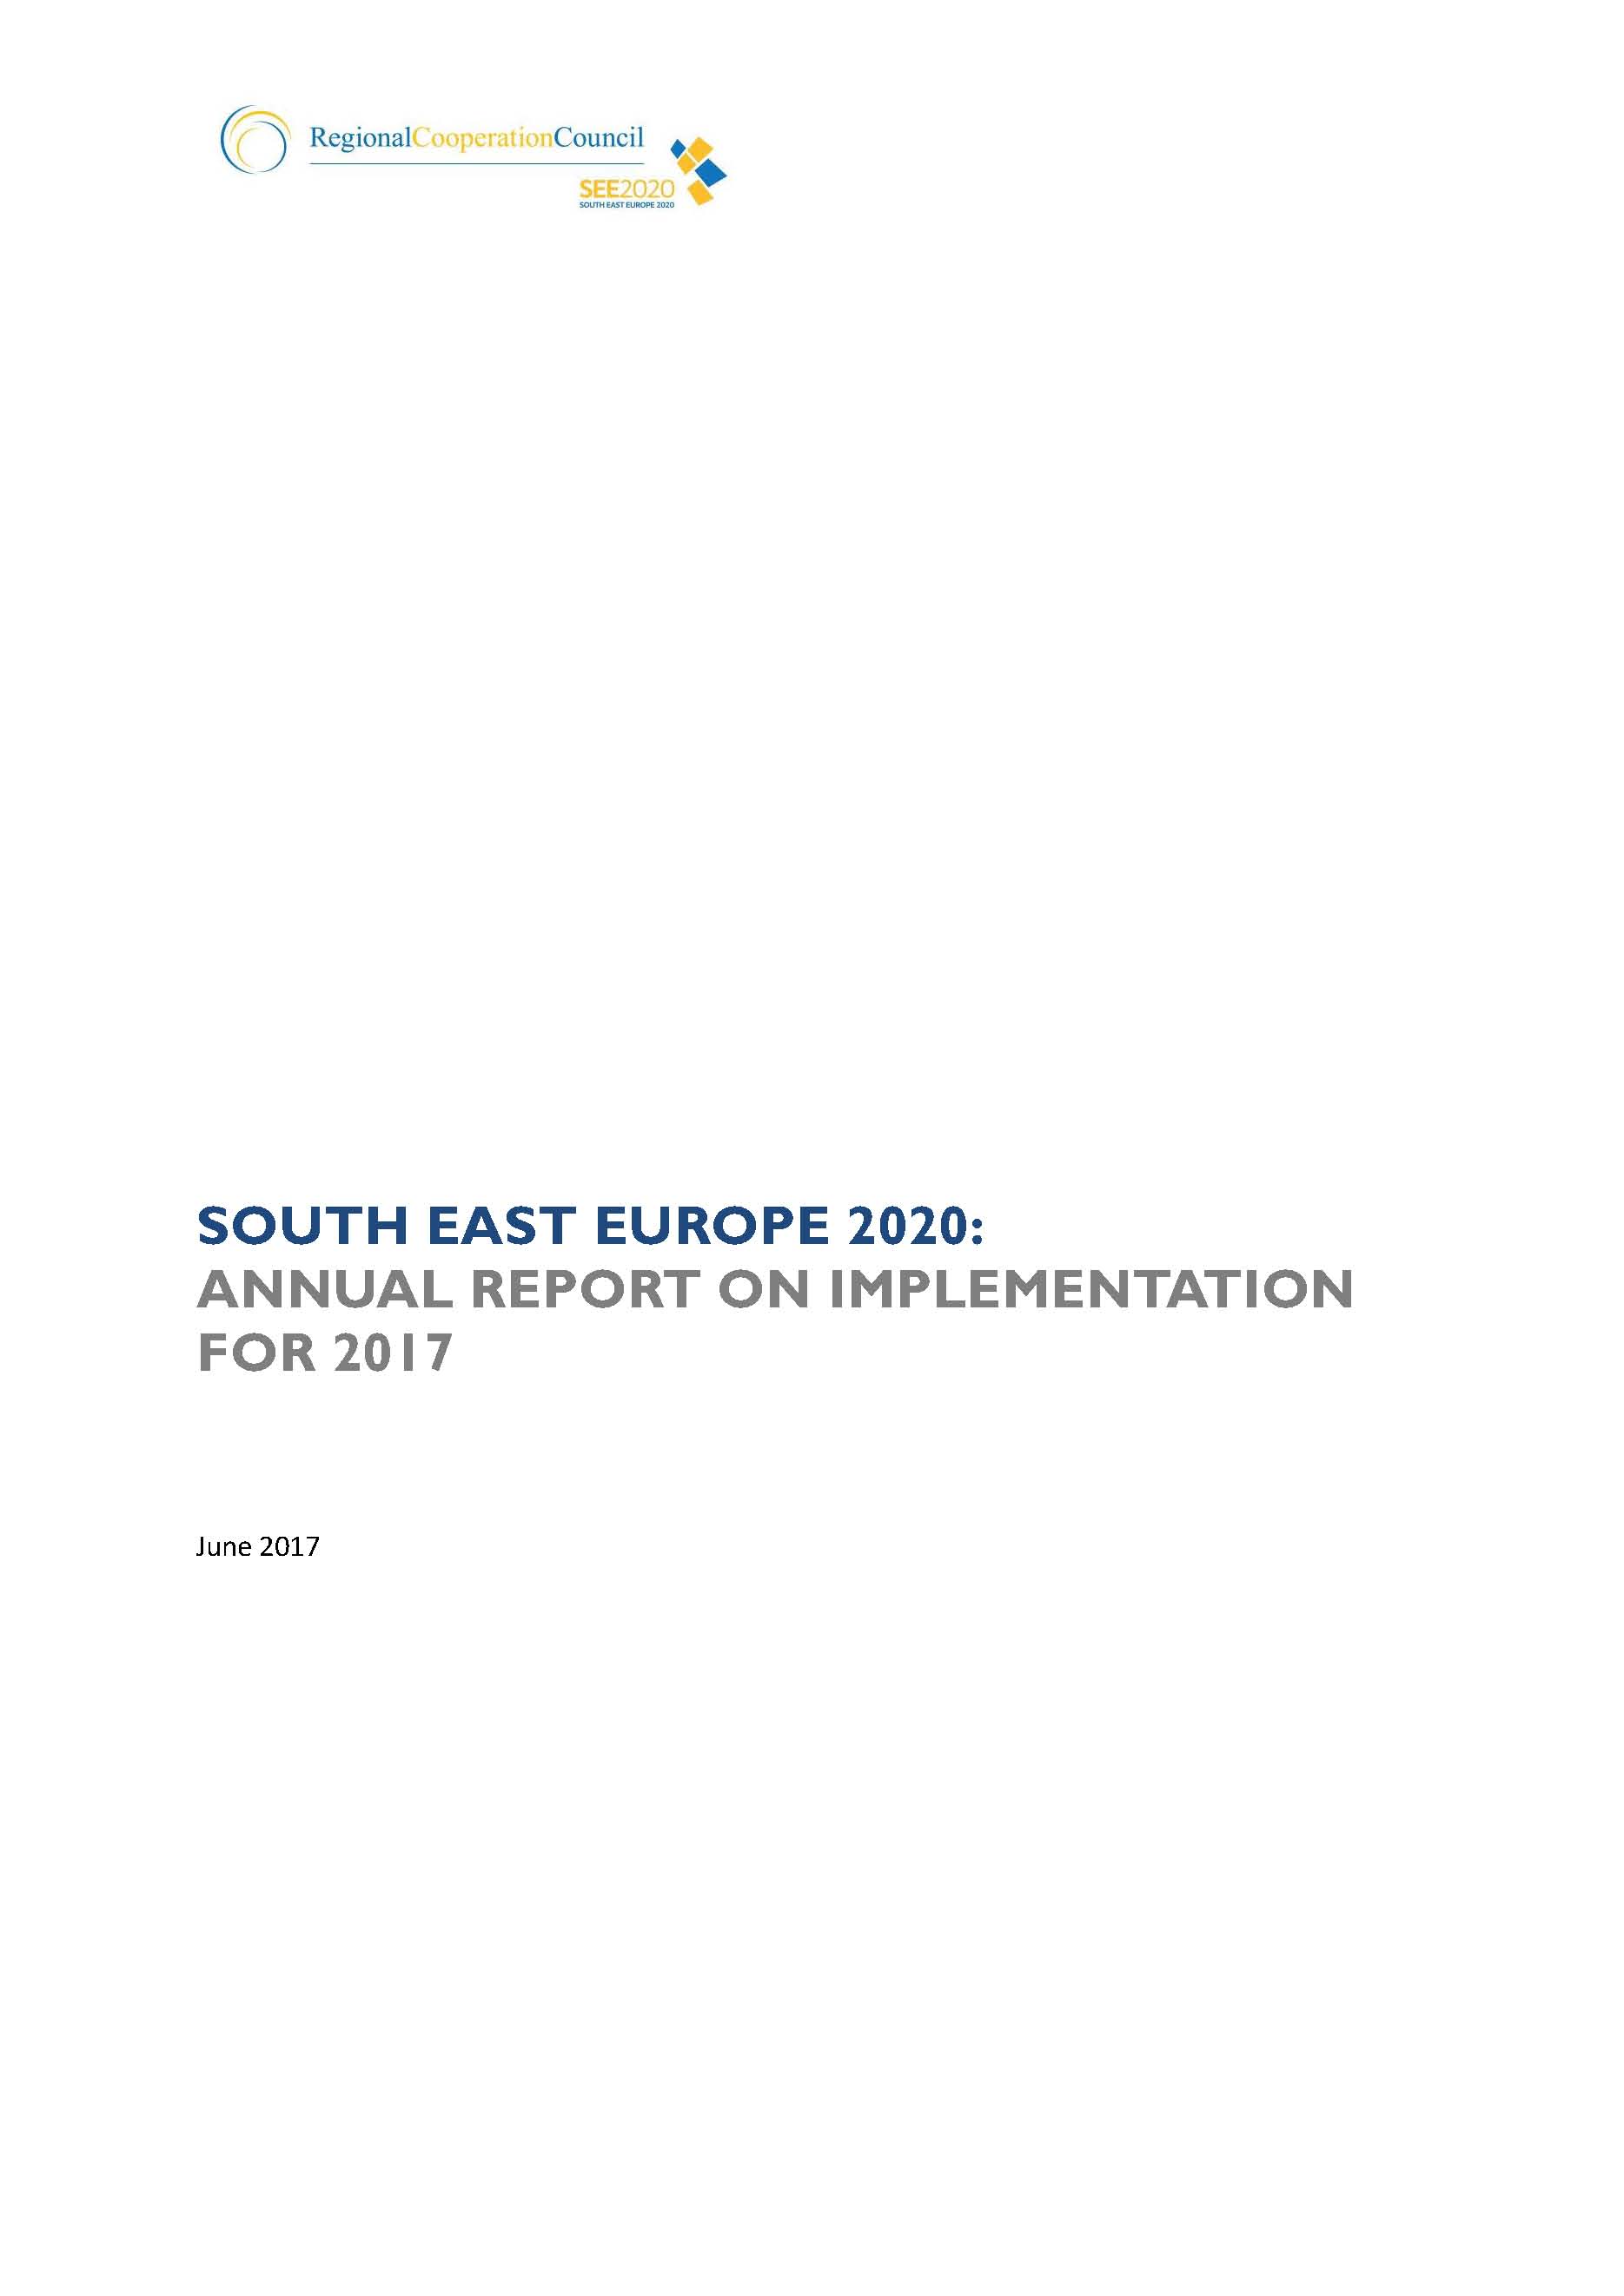 South East Europe 2020: 2017 Annual Report on Implementation